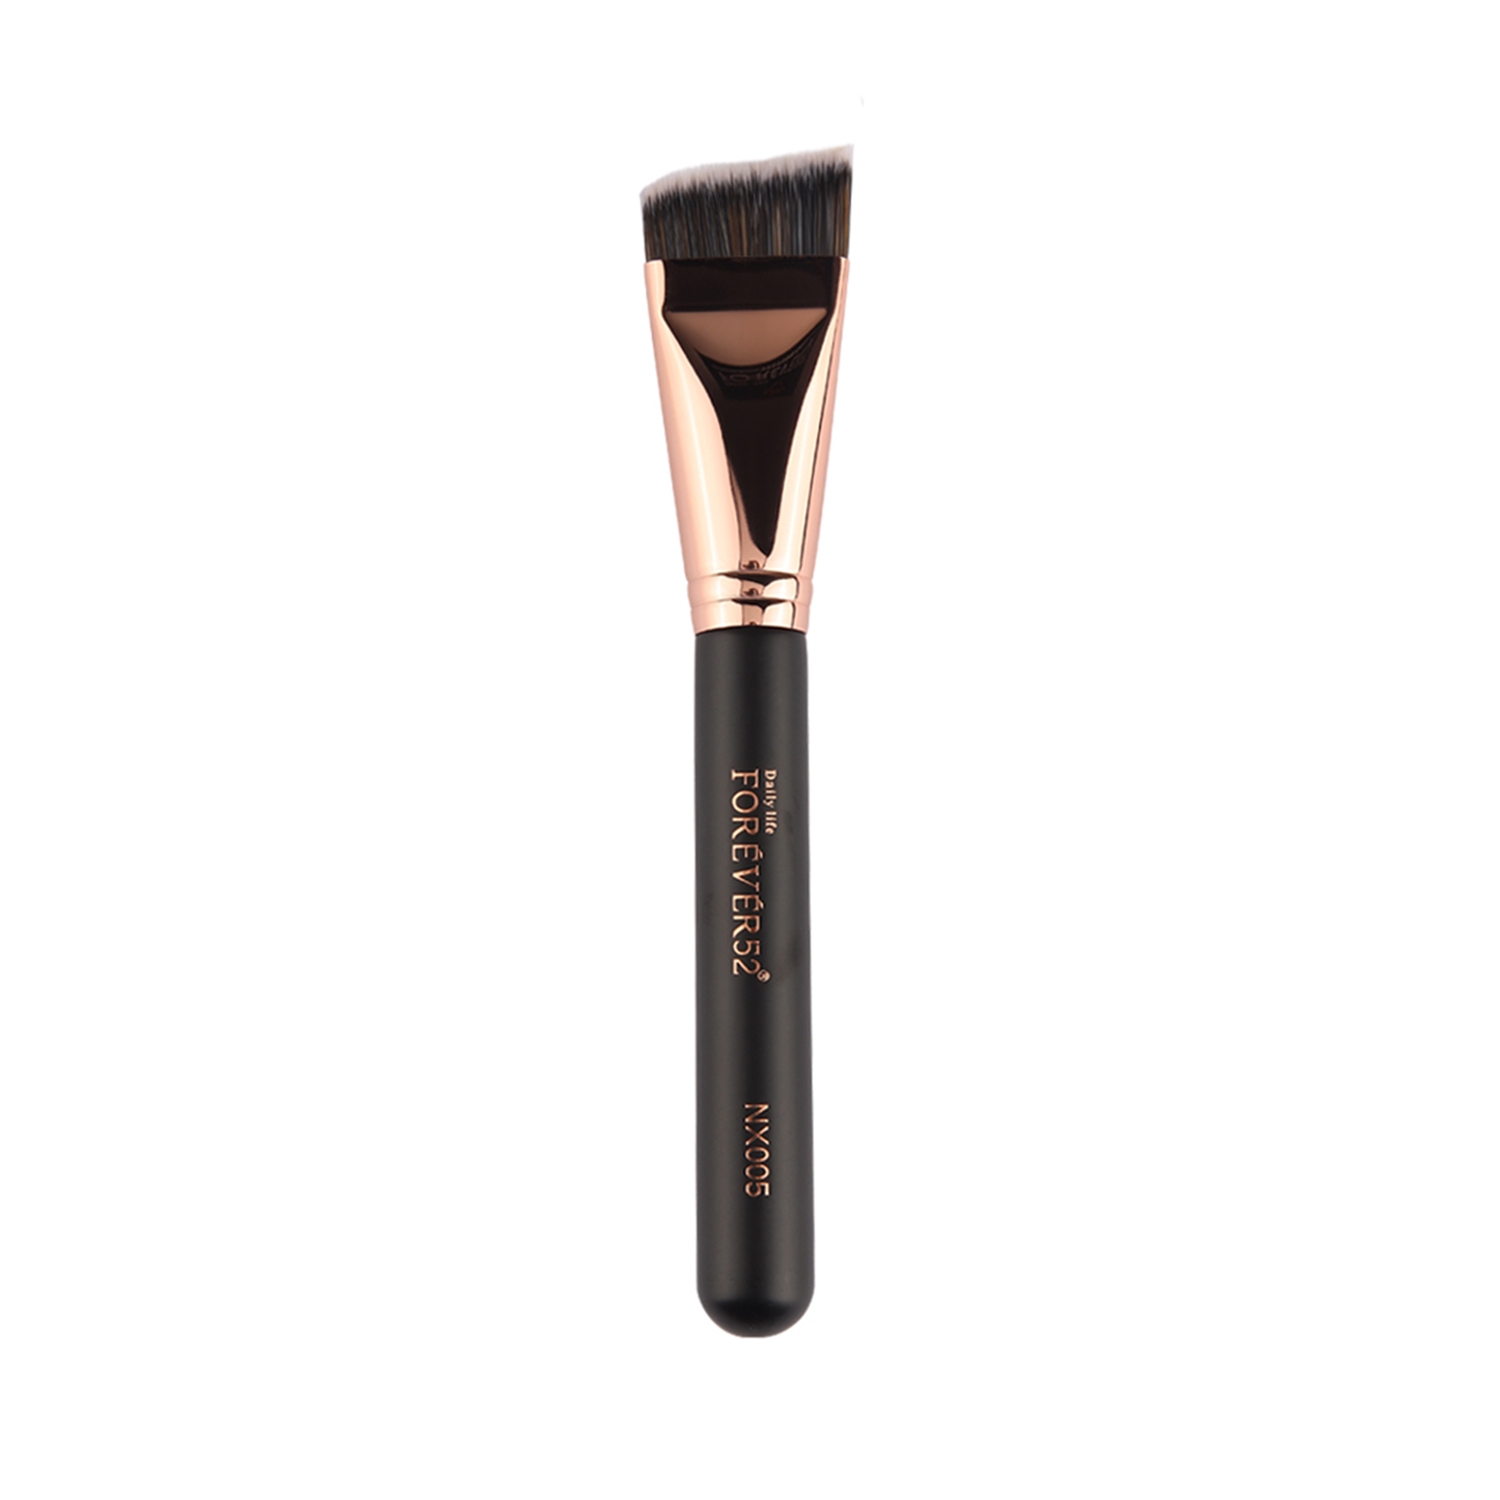 Daily Life Forever52 | Daily Life Forever52 Contour Brush - NX005 (1Pc)